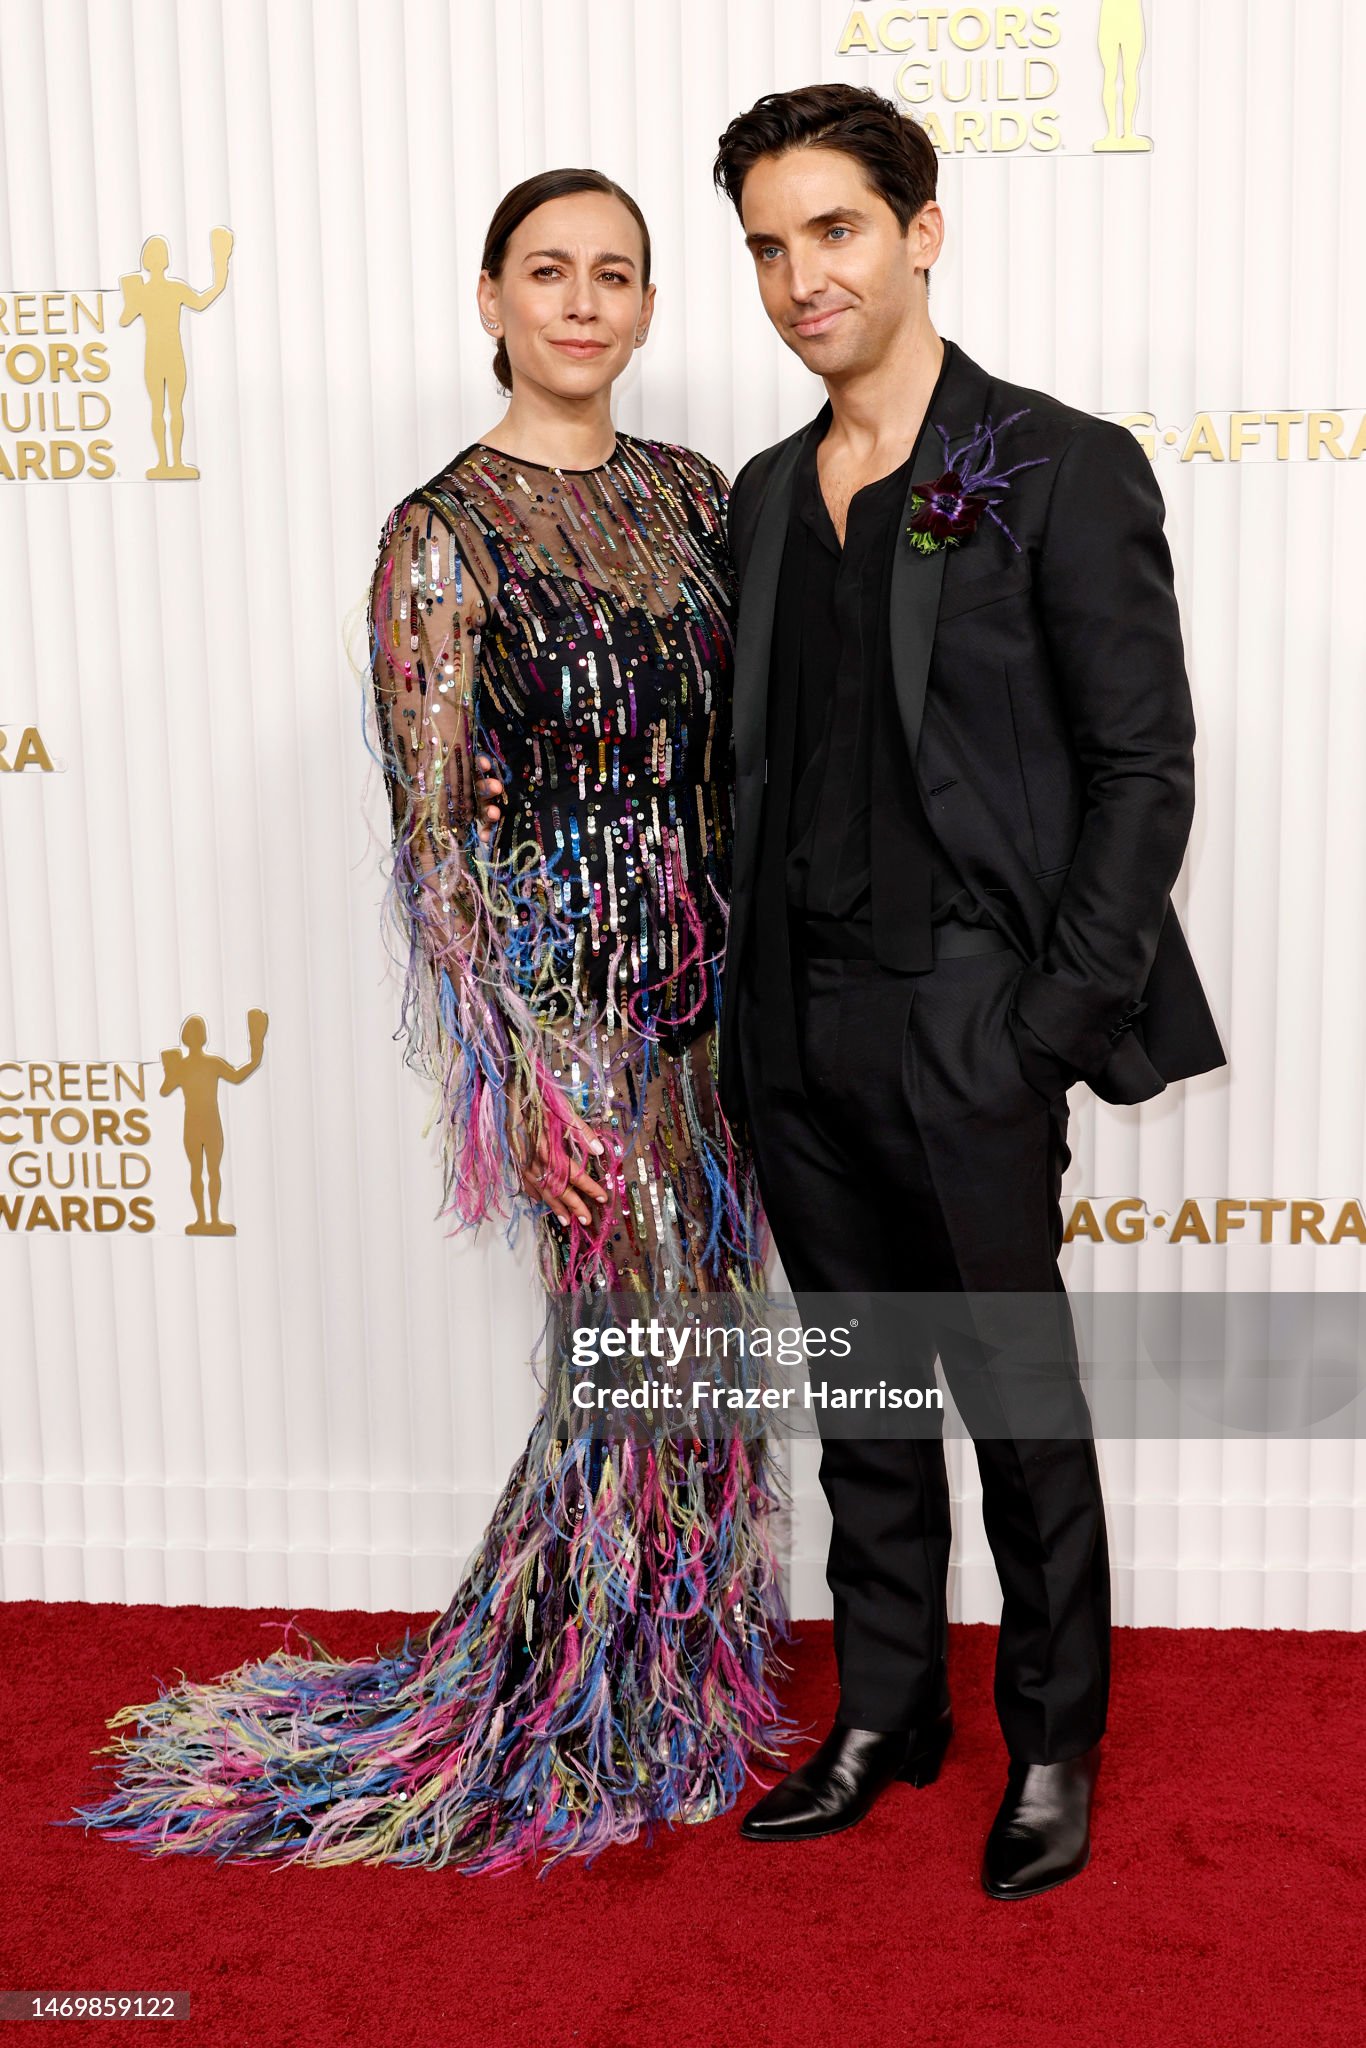 lucia-aniello-and-paul-w-downs-attend-the-29th-annual-screen-actors-guild-awards-at-fairmont.jpg